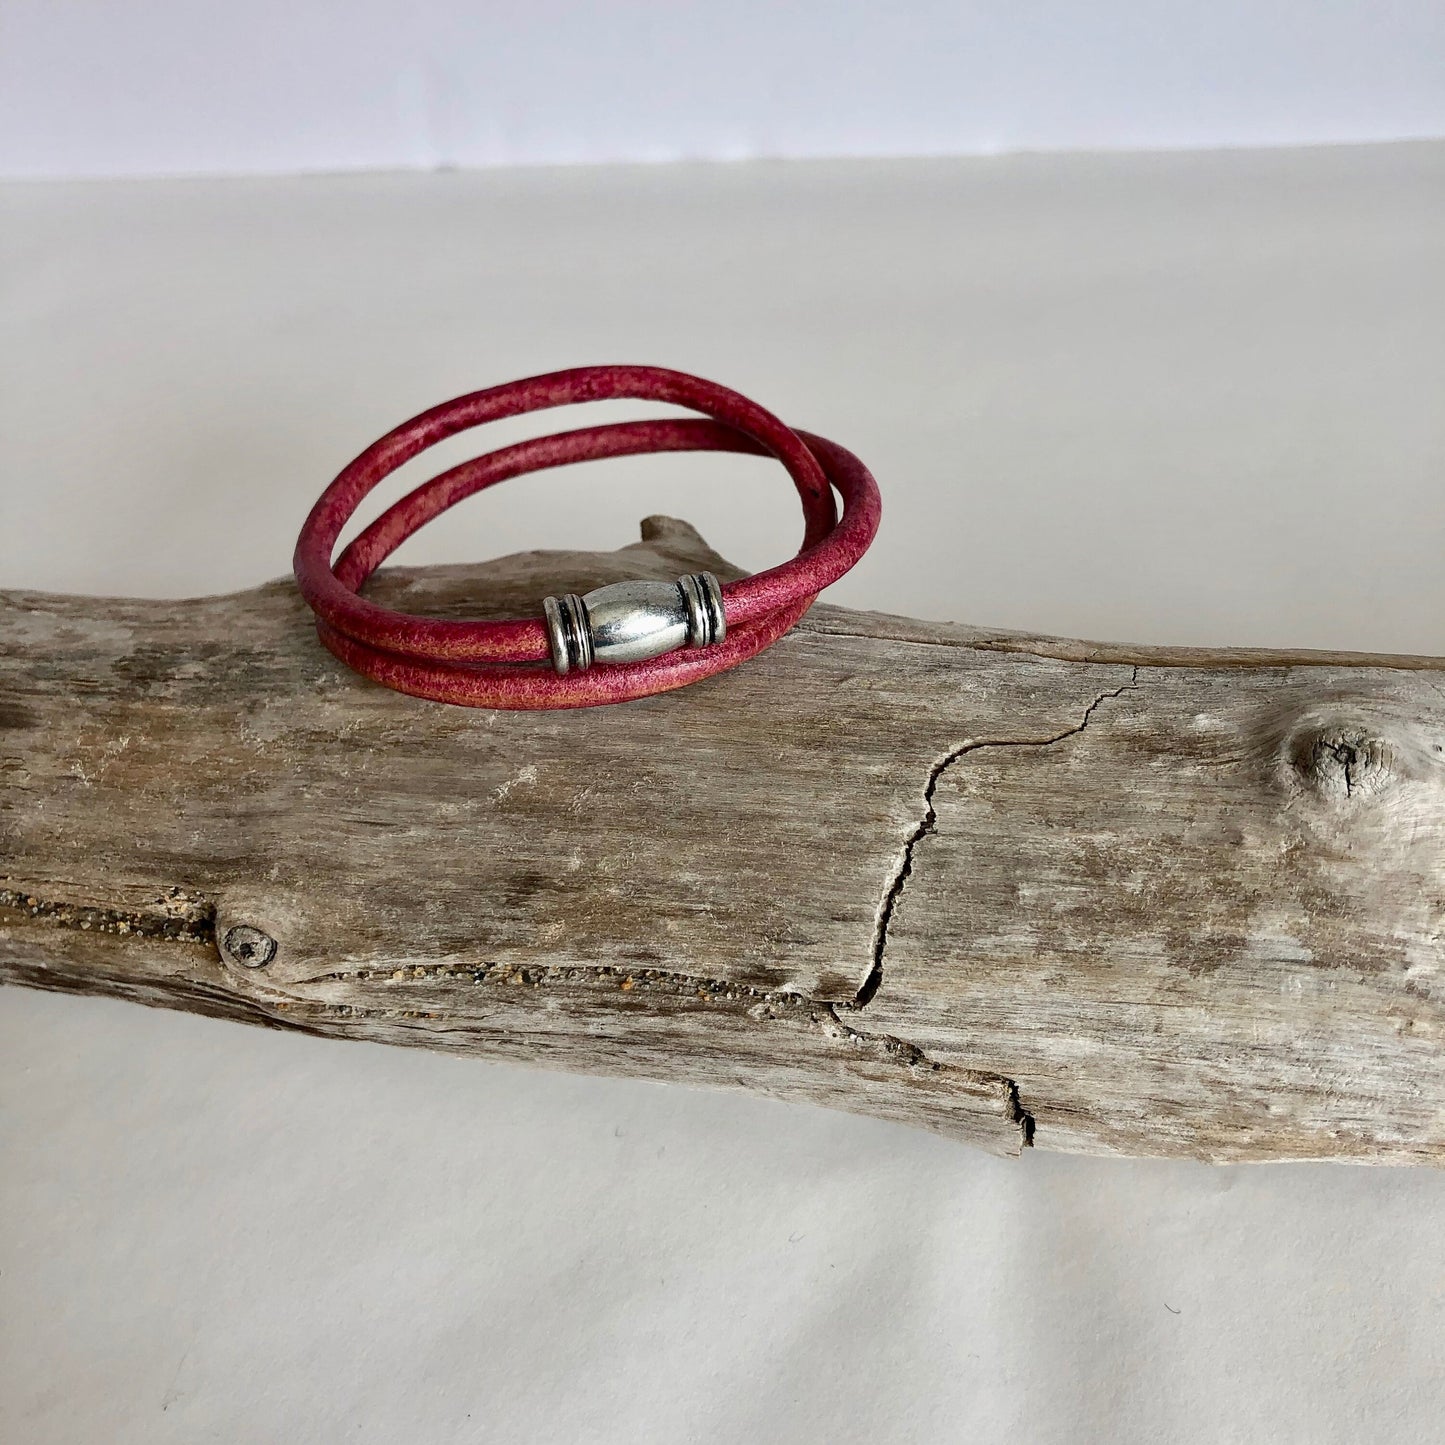 Leather bracelet, made of fine soft red Italian leather, and a fine magnetic tube clasp. Classic simplicity.